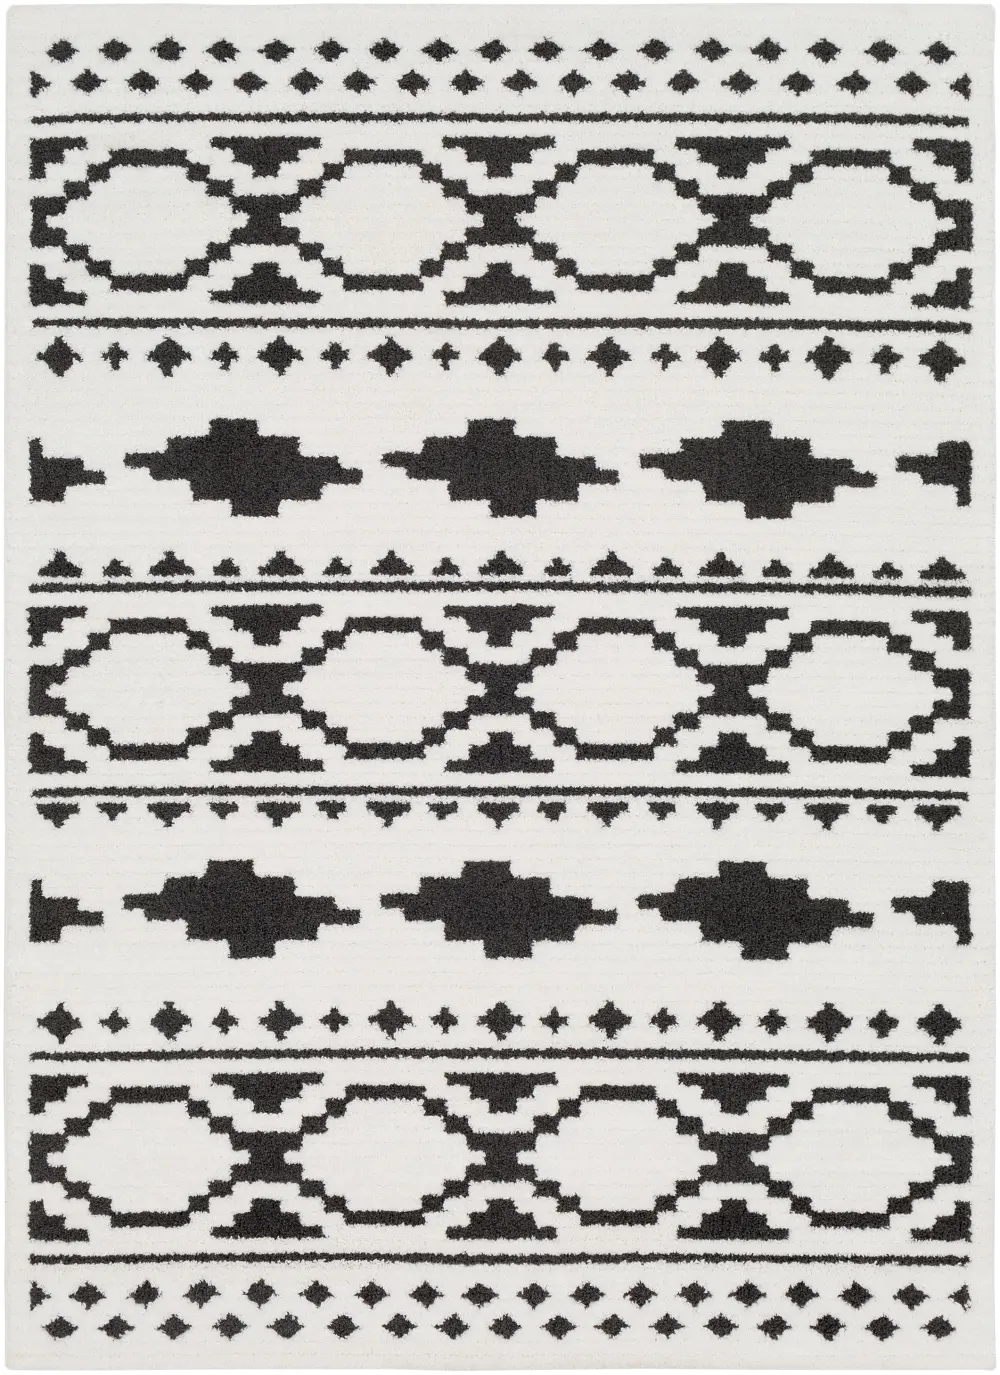 2 x 3 X-Small Charcoal Gray, Black and White Area Rug - Moroccan Shag-1